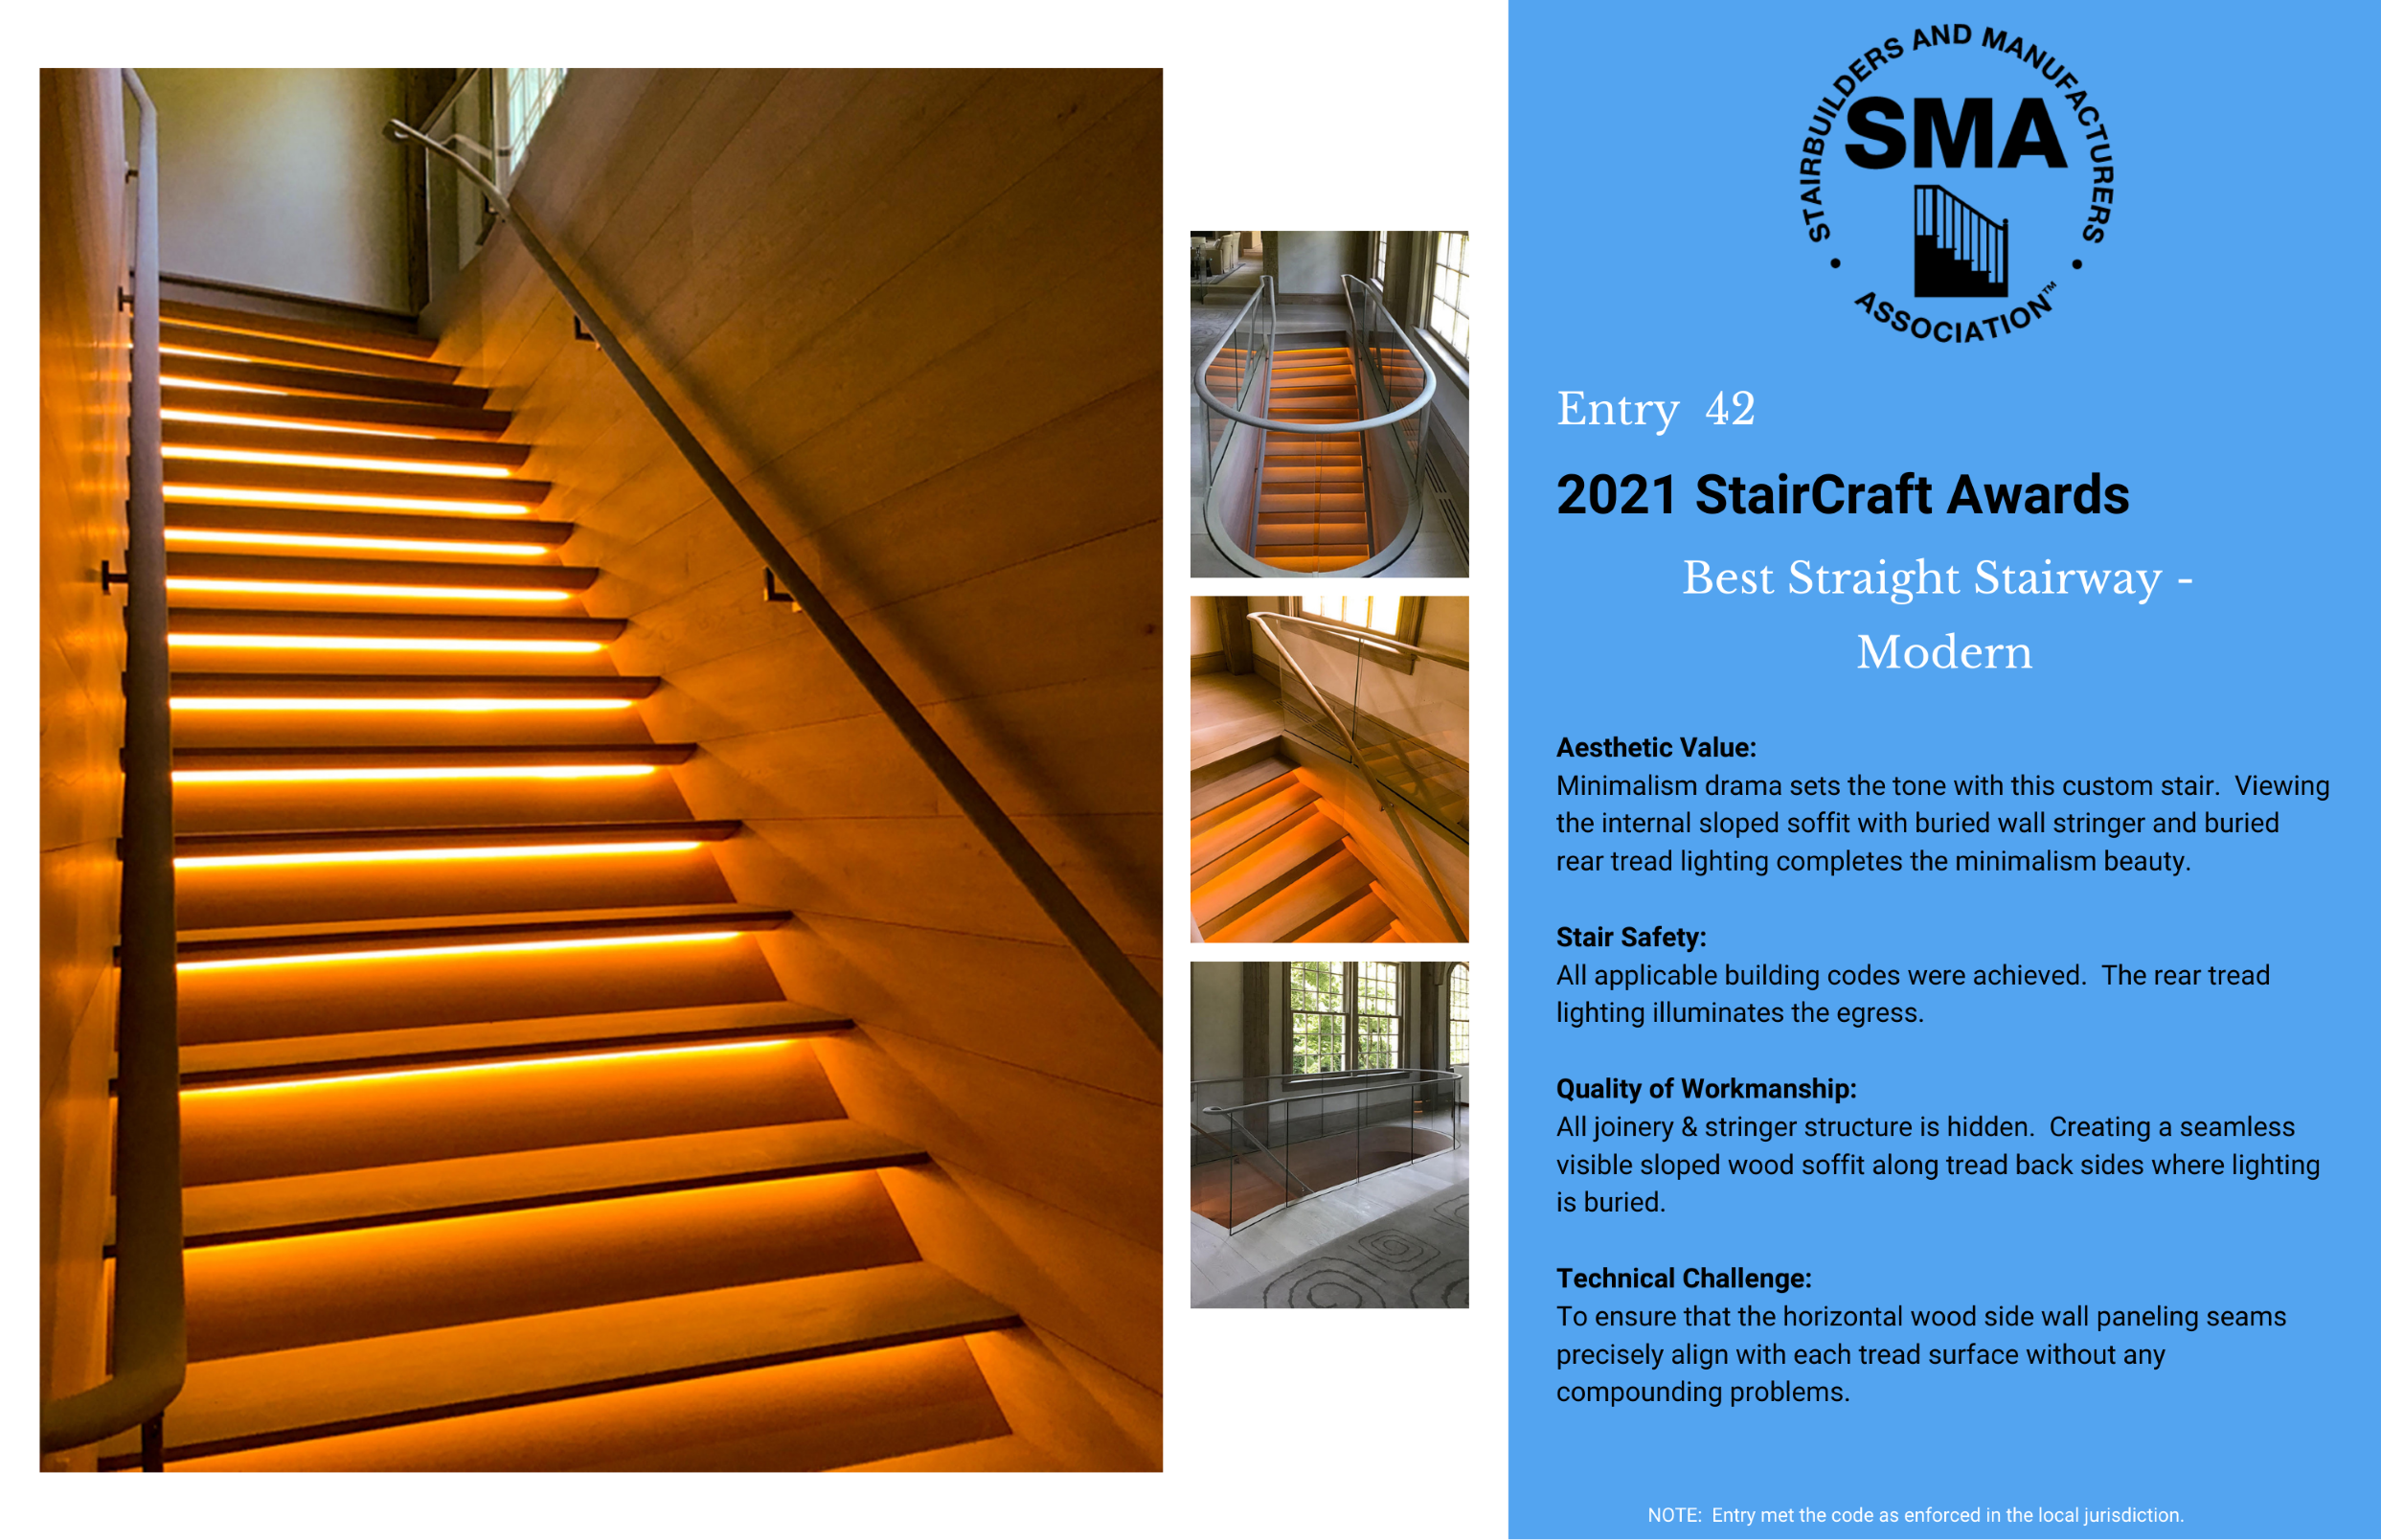 2021 StairCraft Awards Entry 42